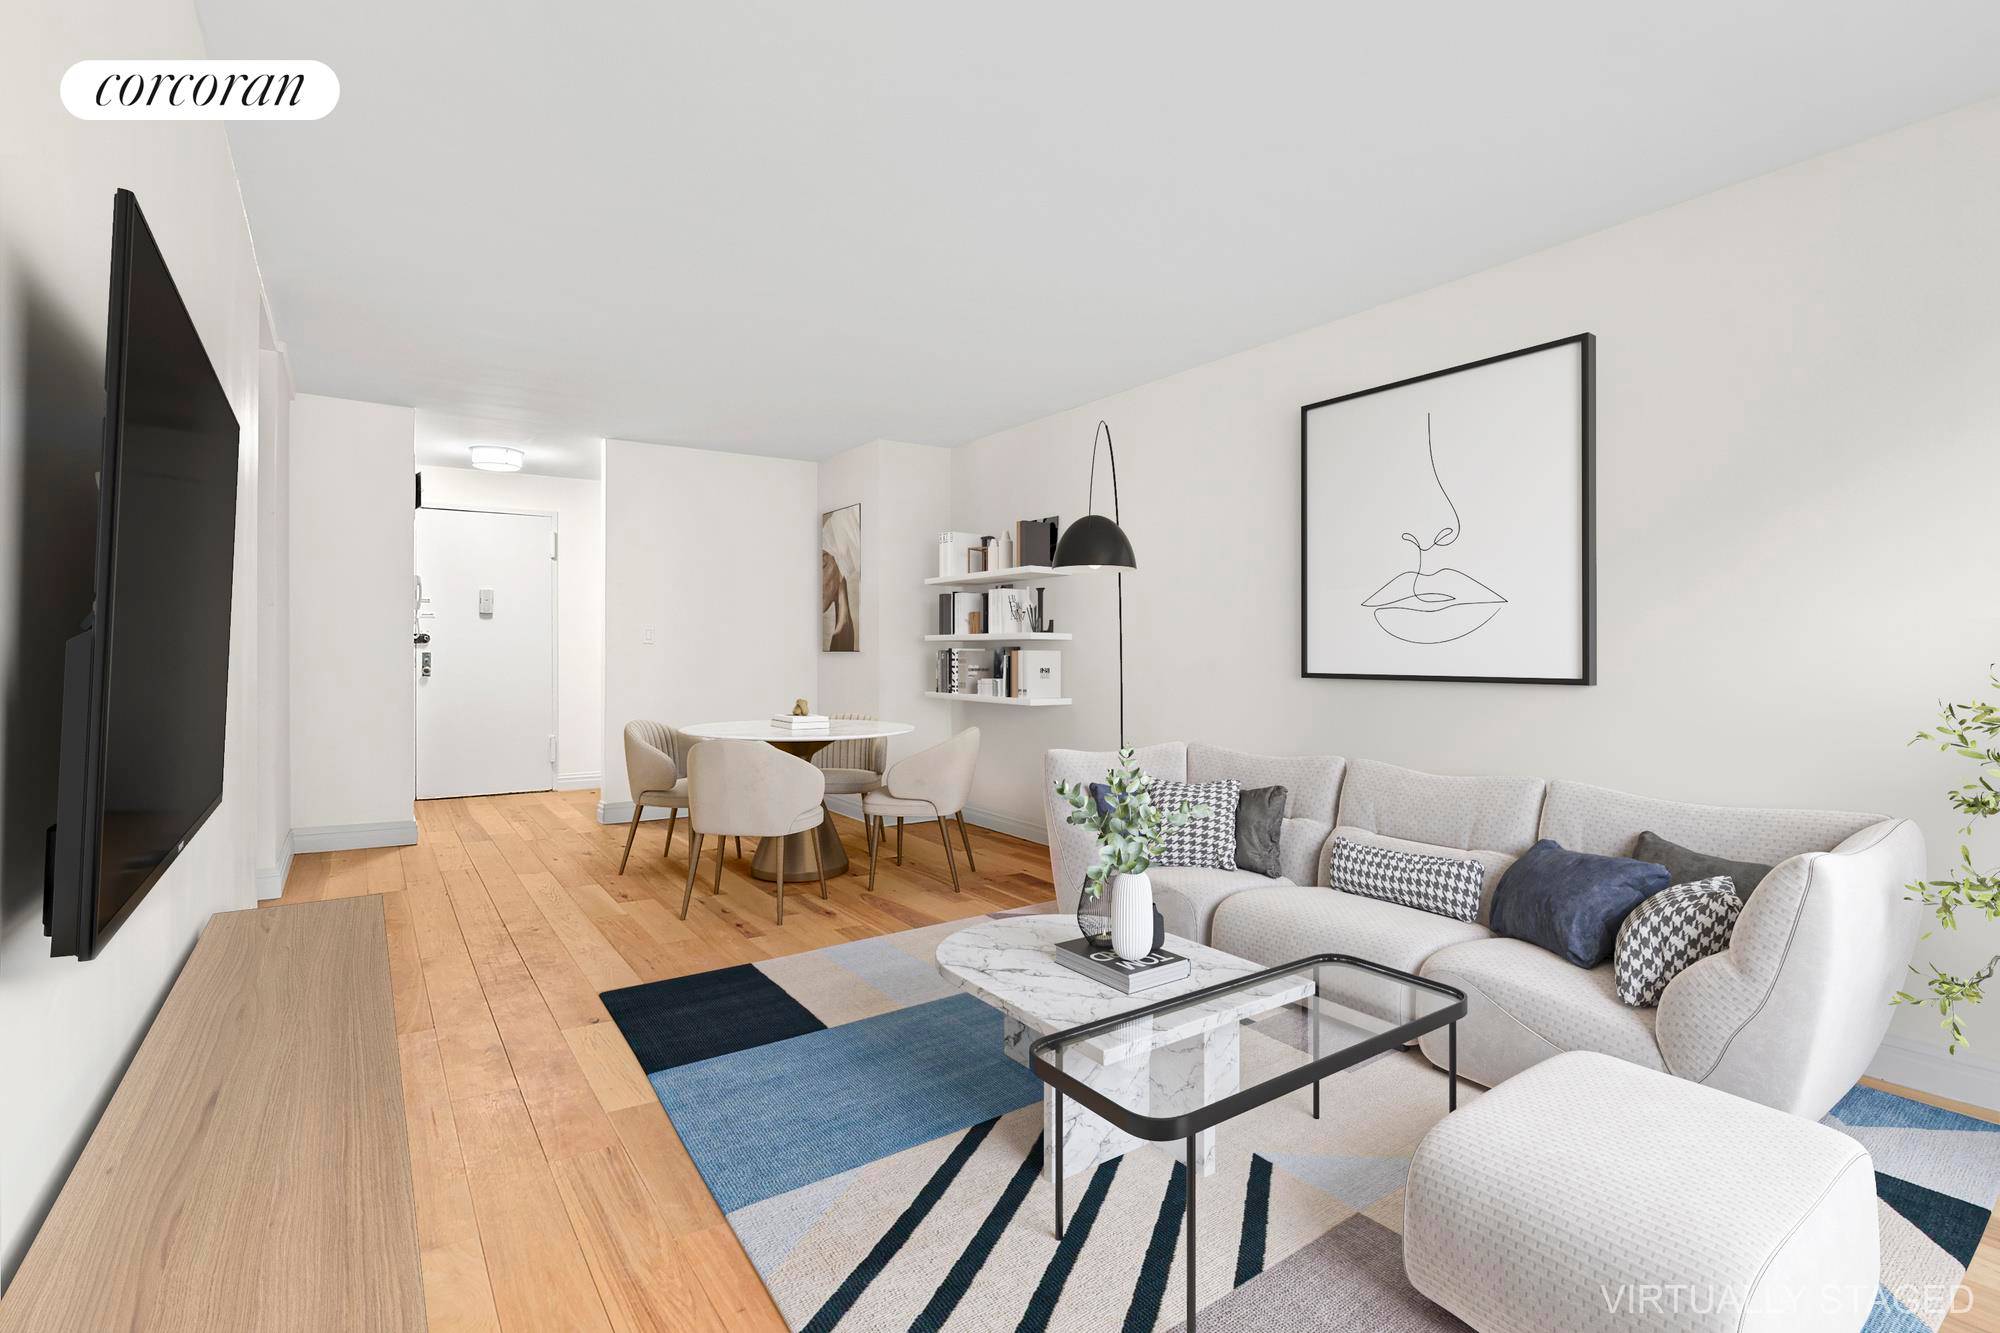 Welcome to 185 Hall St Unit 3C This sprawling one bedroom unit boasts a plethora of upgrades including a newly renovated kitchen, bathroom, spacious living area amp ; an abundance ...